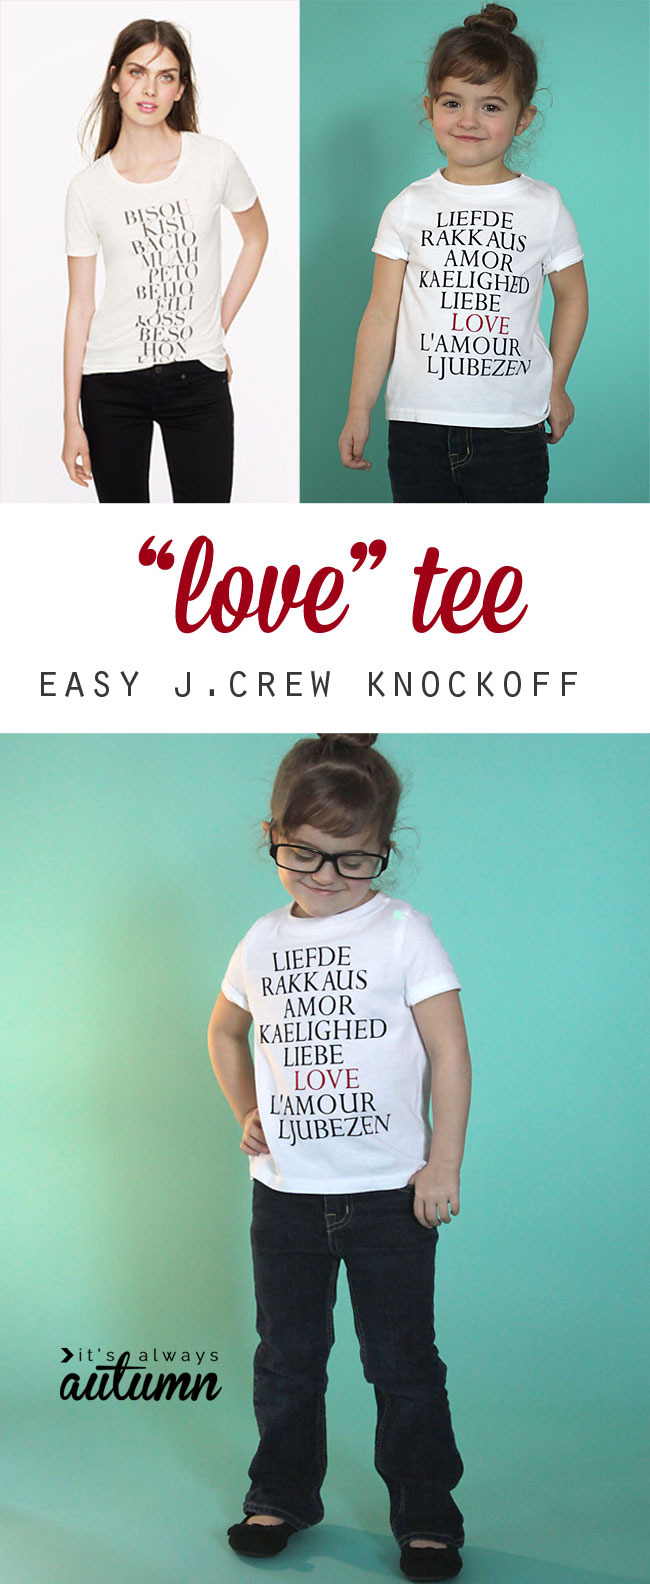 cute! easy j.crew knockoff graphic tee "LOVE" shirt. perfect for Valentine's day!